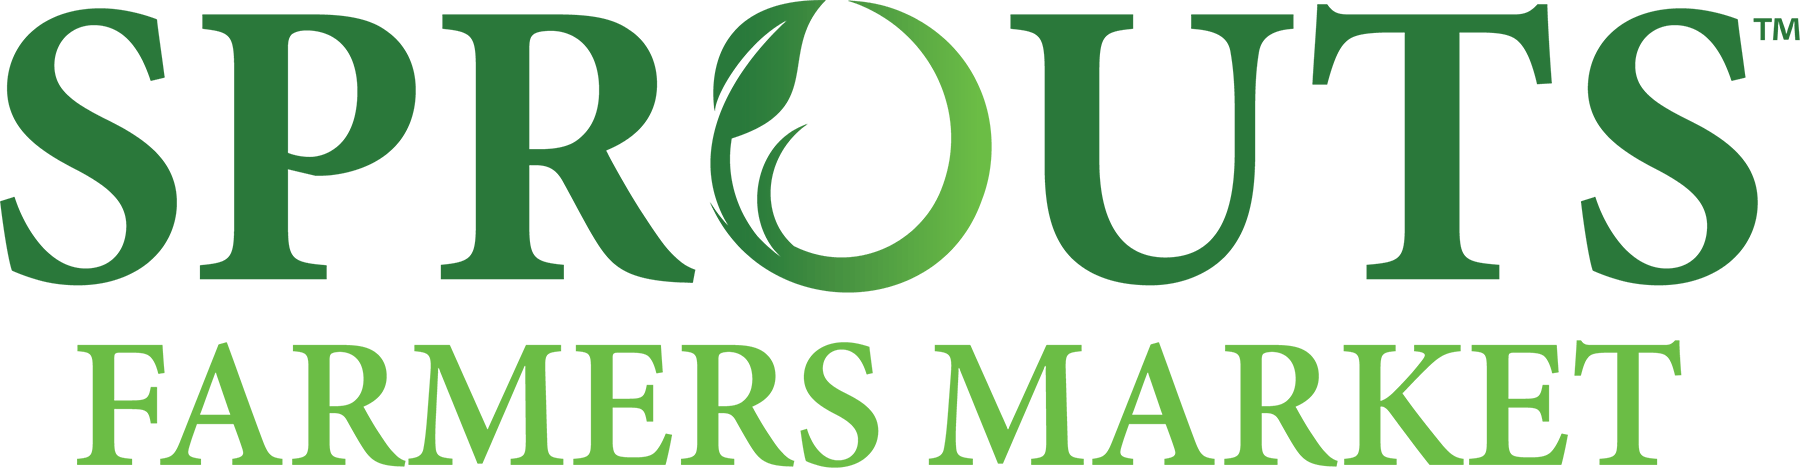 Sprouts_Farmers_Market_Logo.png